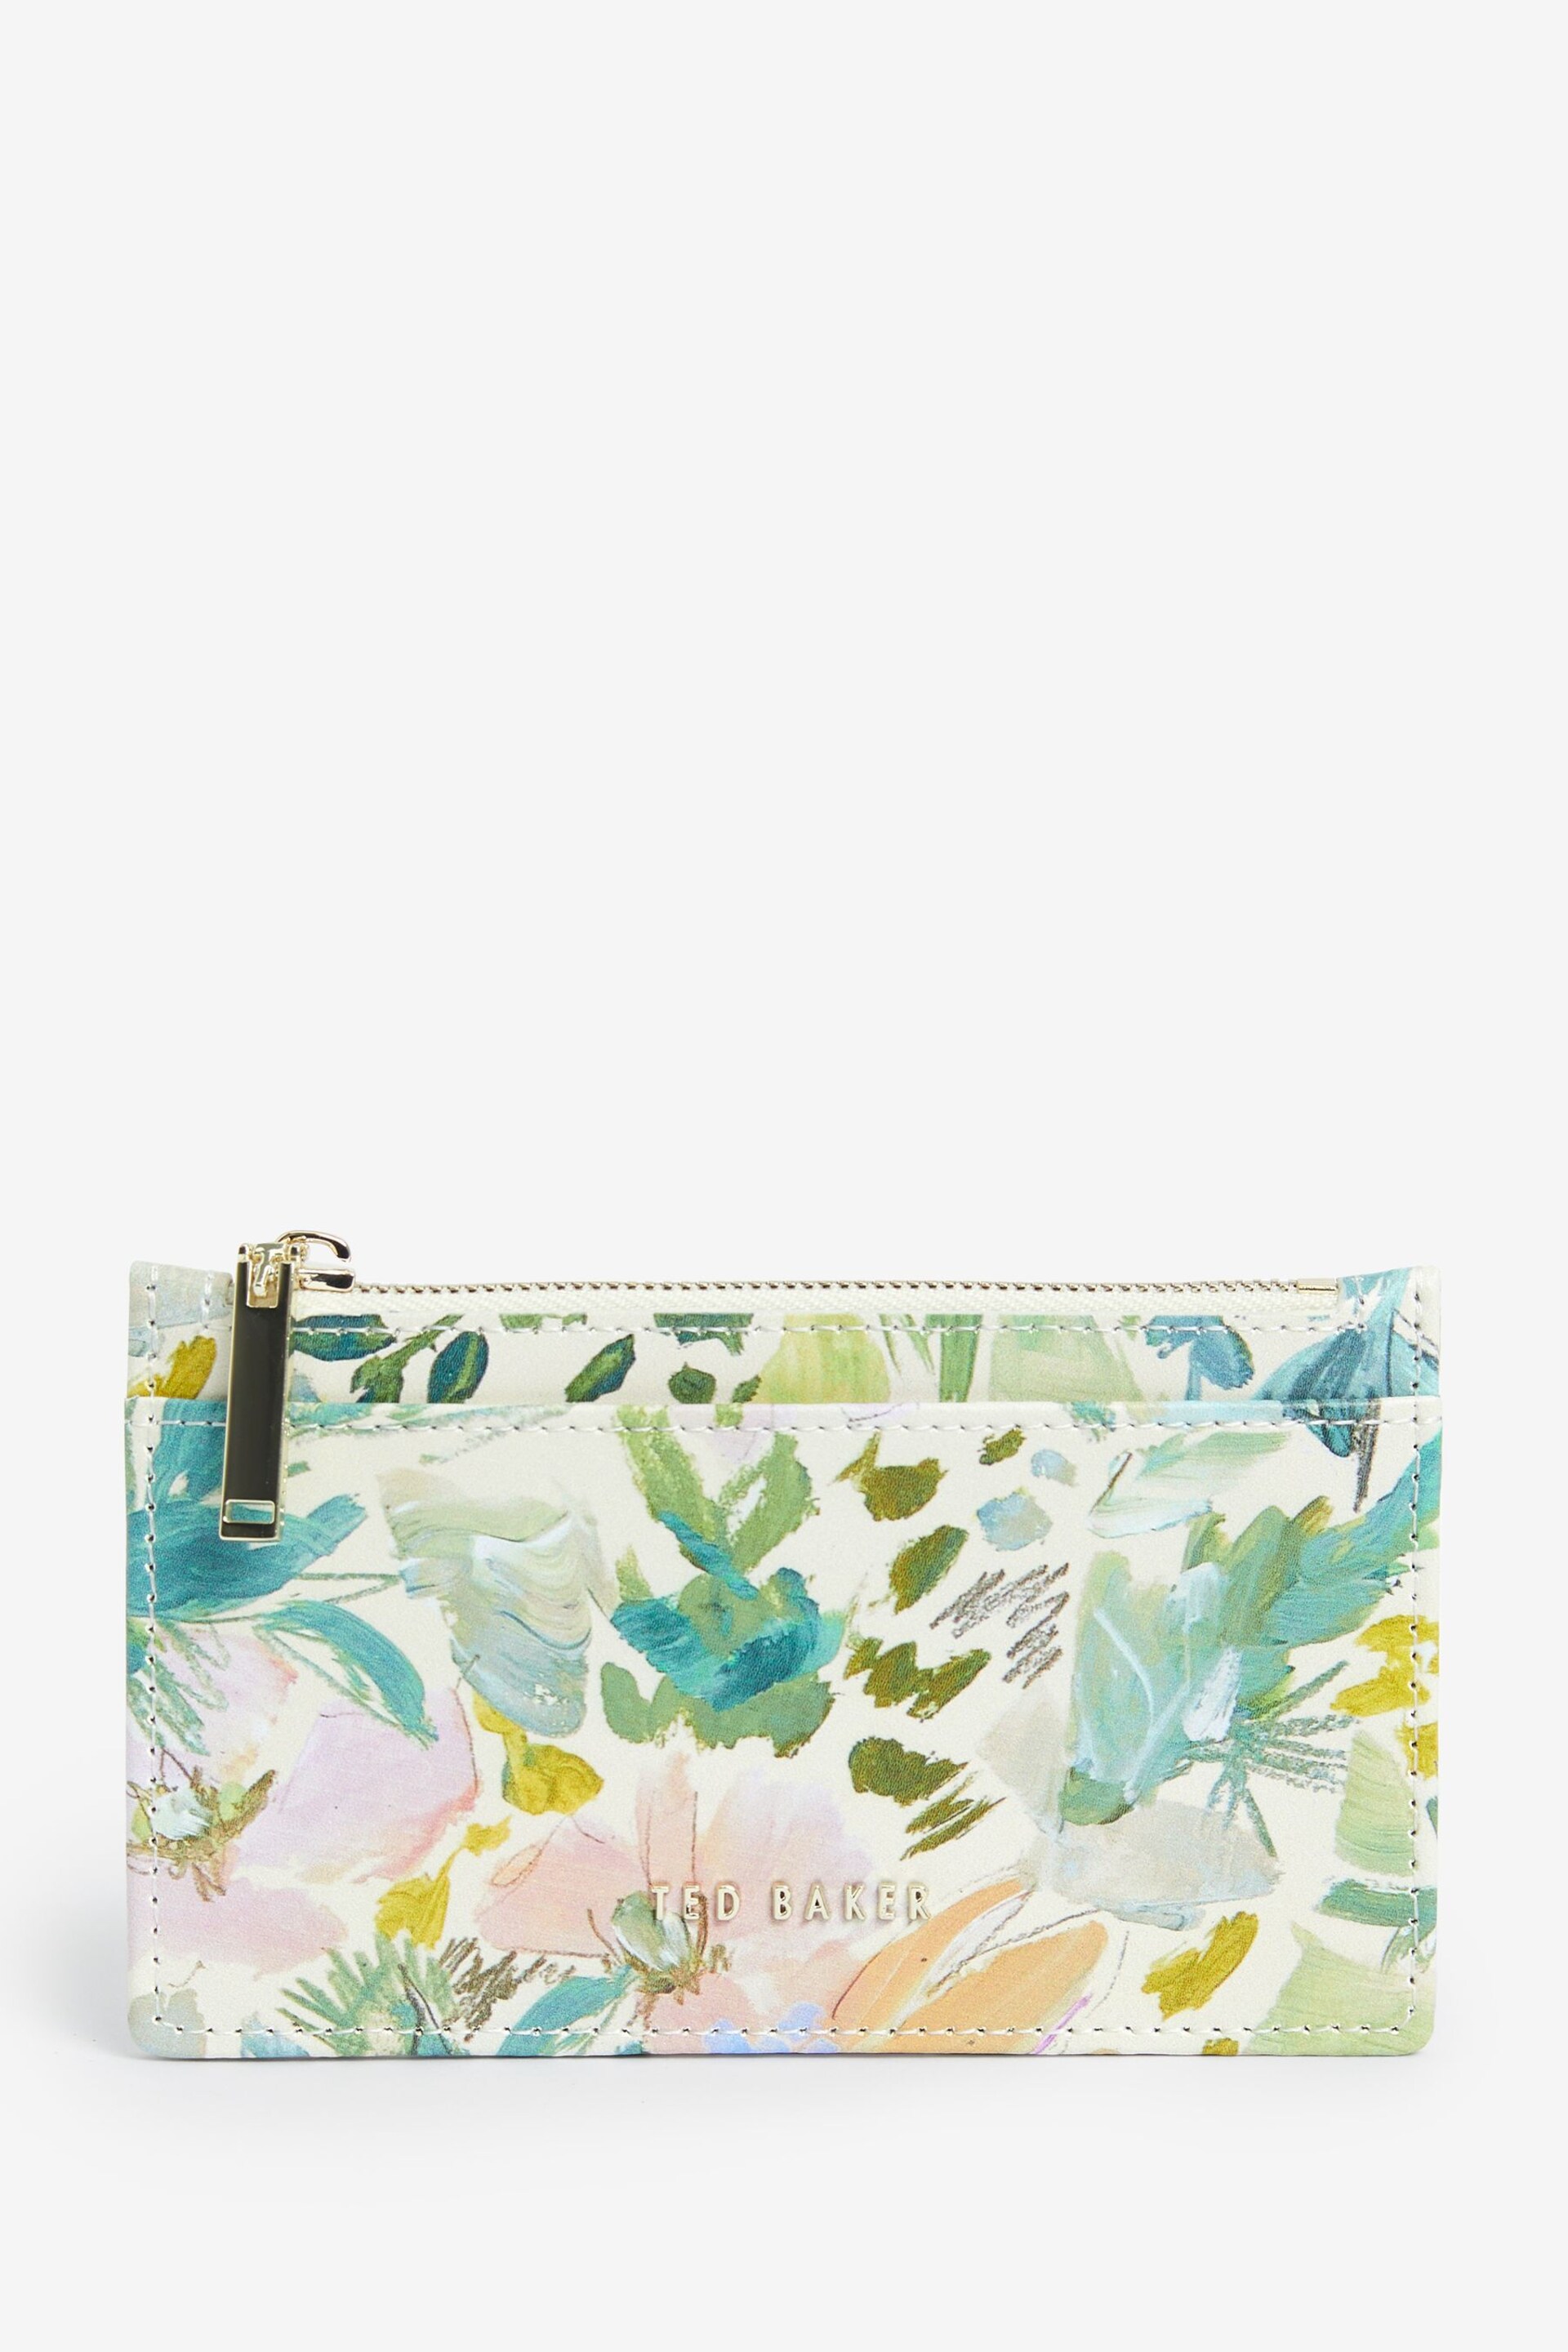 Ted Baker Cream Medell Painted Meadow Card Holder - Image 4 of 4